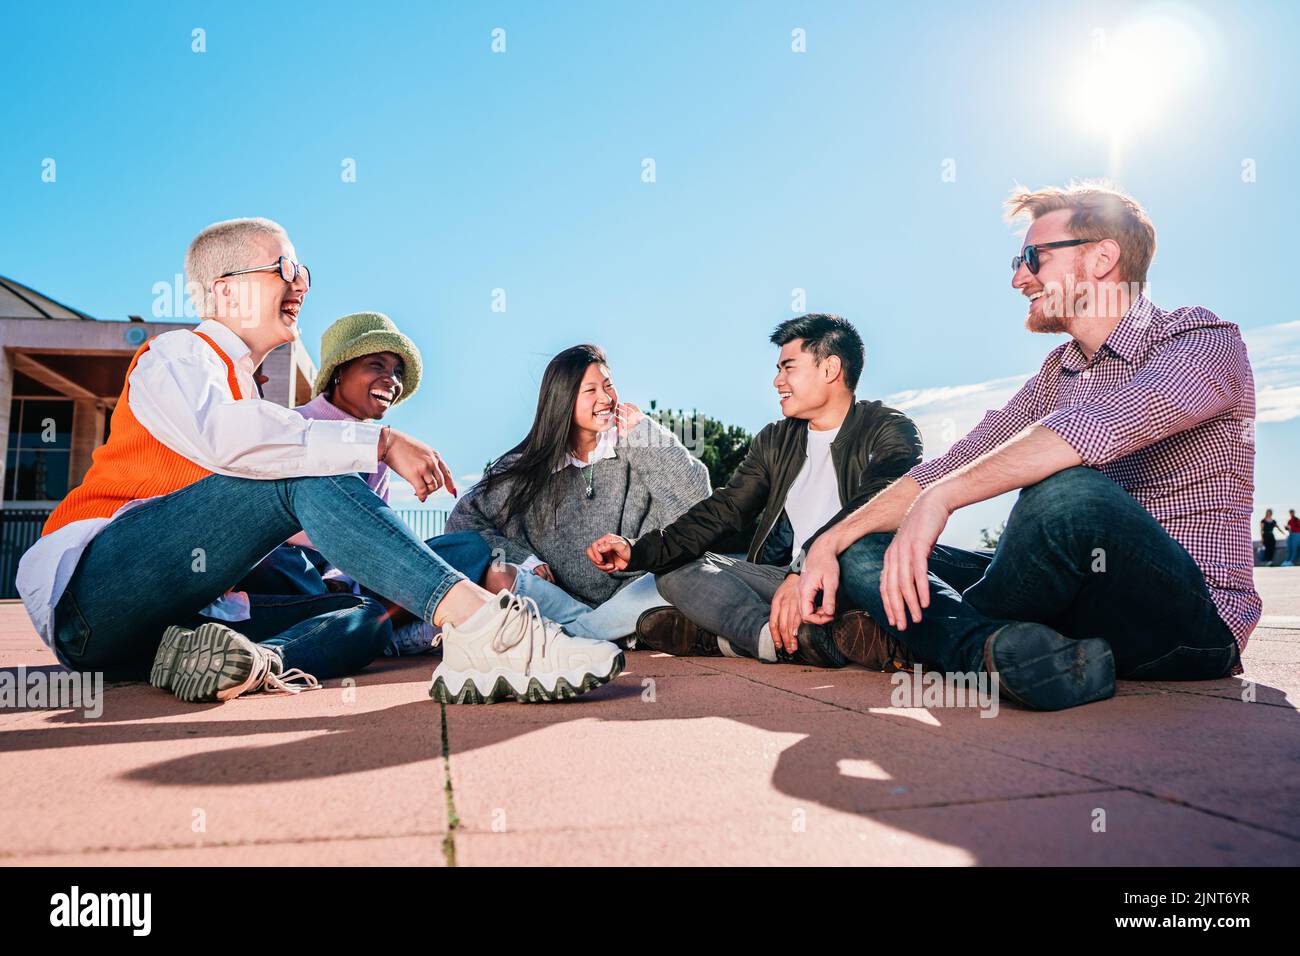 Group of friends sitting on floor laughing and having fun. Stock Photo